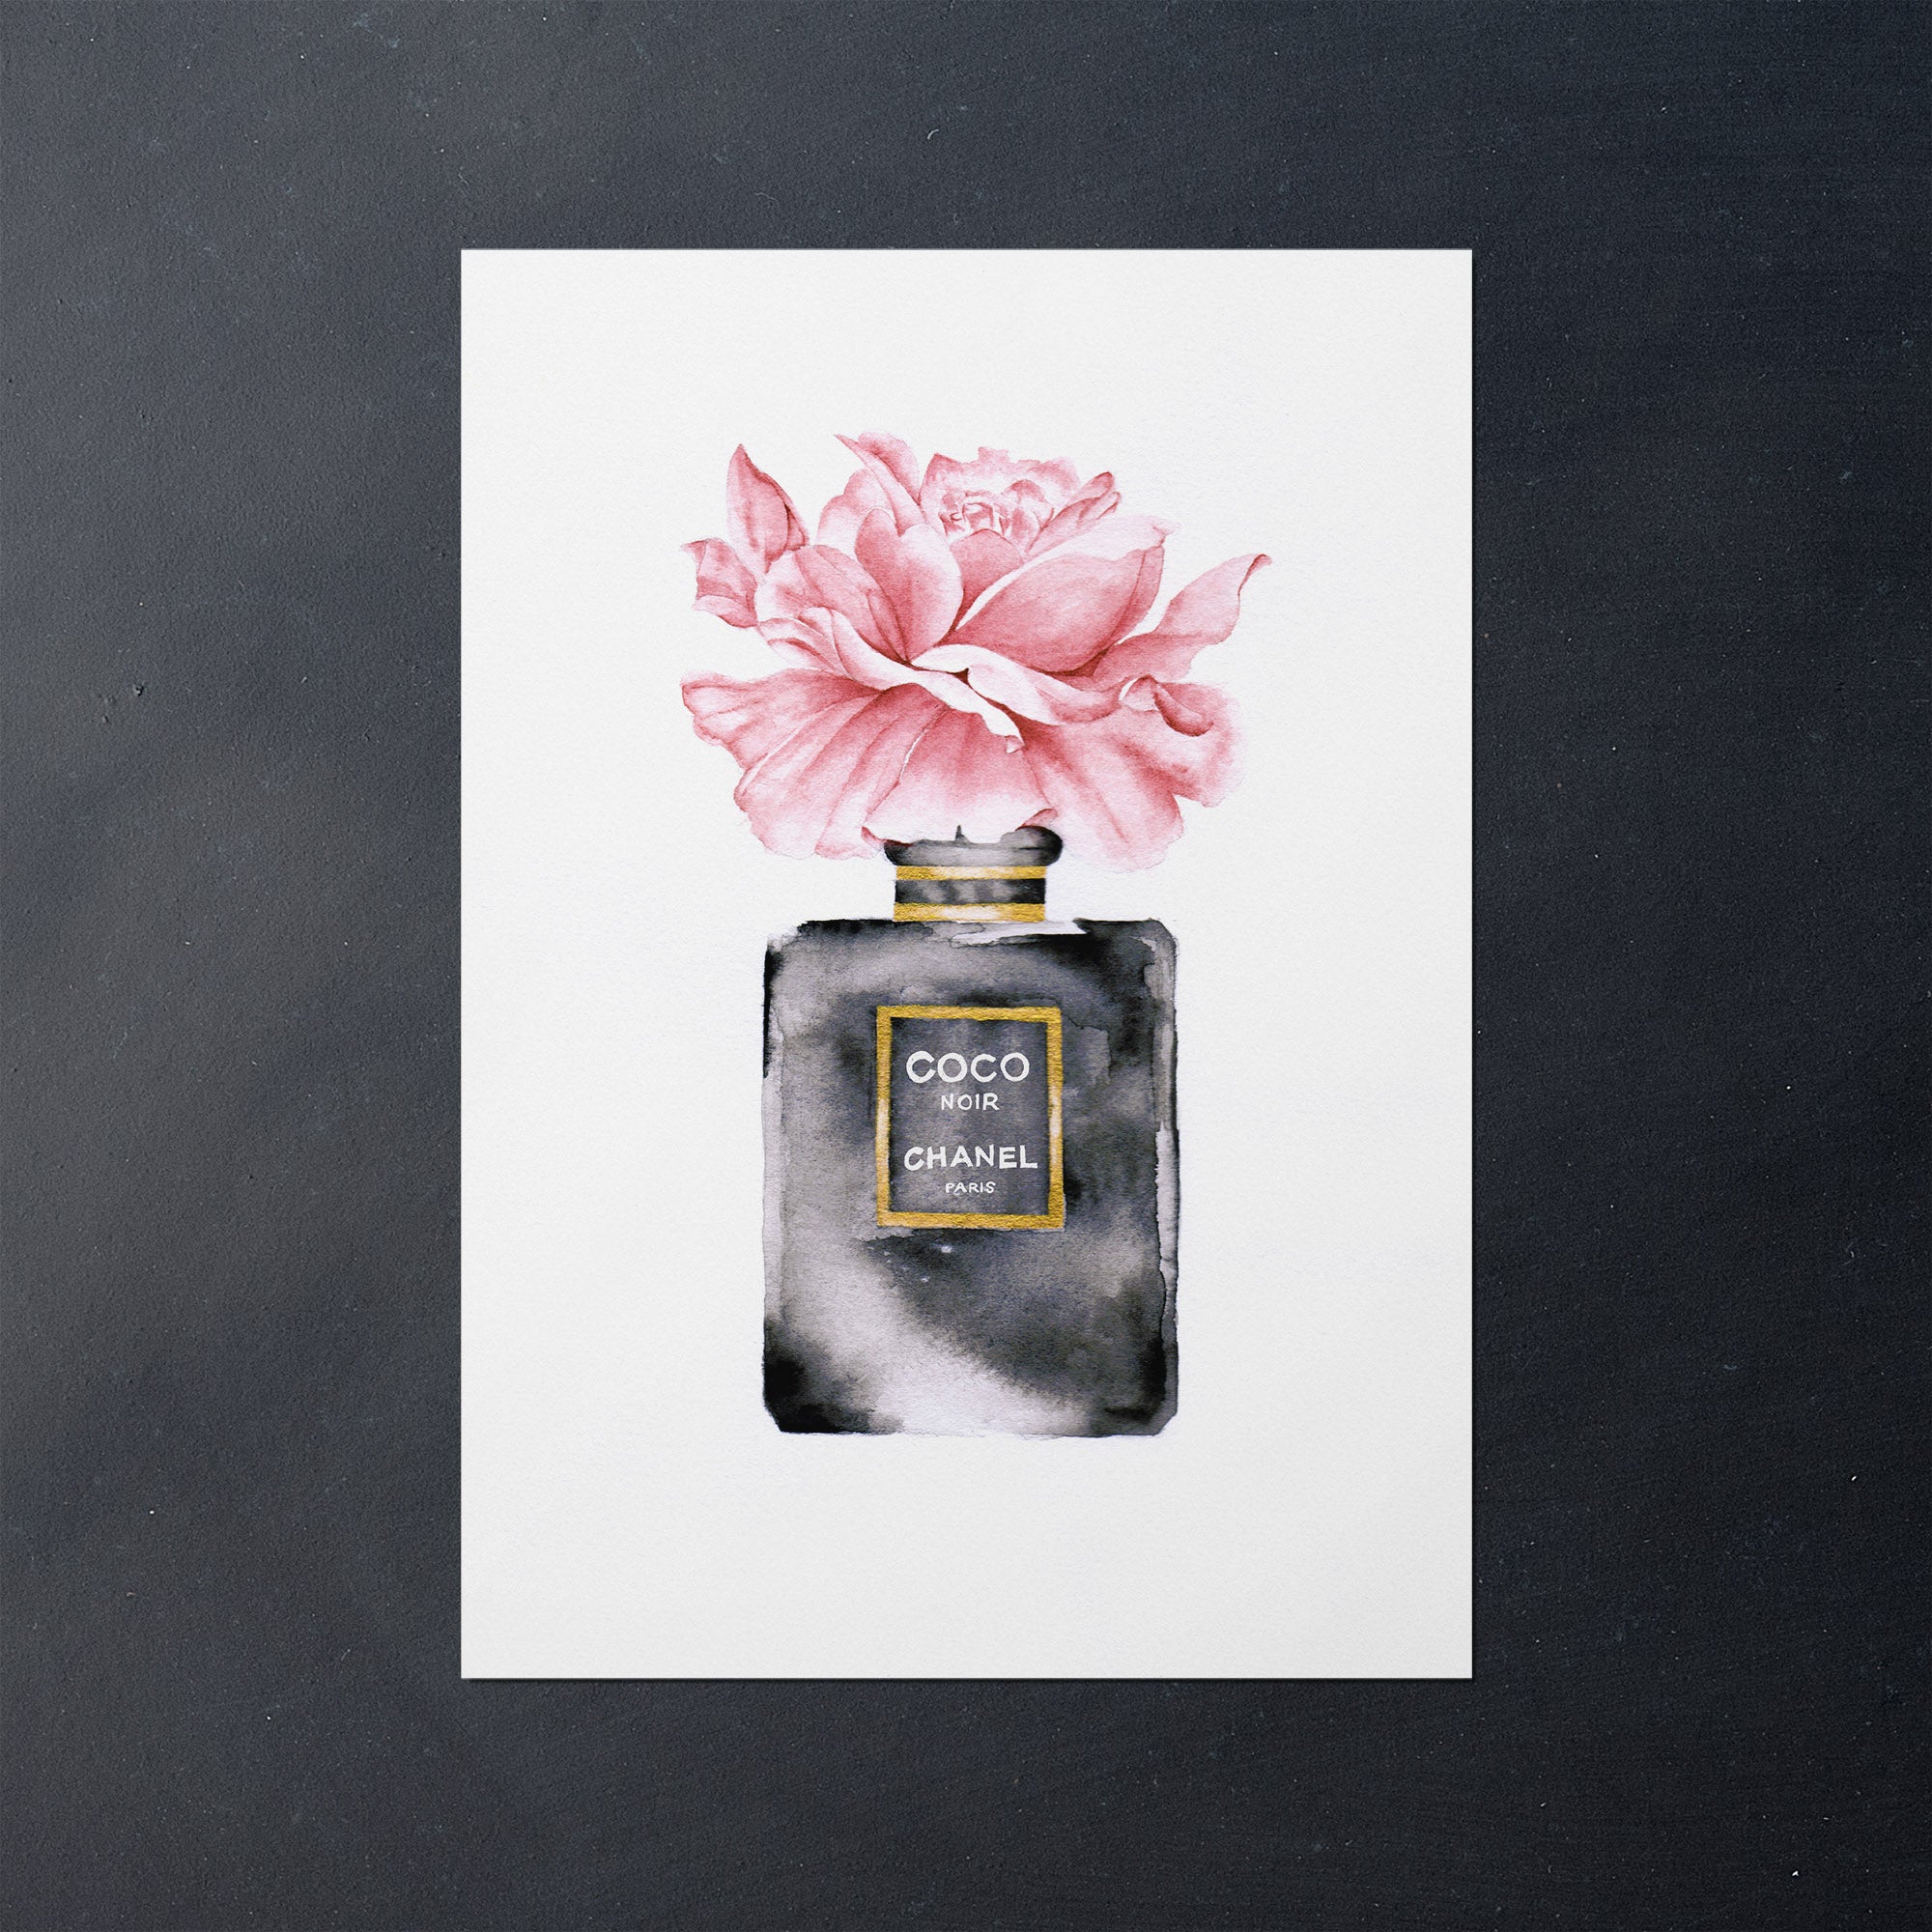 Watercolor artwork of a Chanel perfume bottle with pink roses